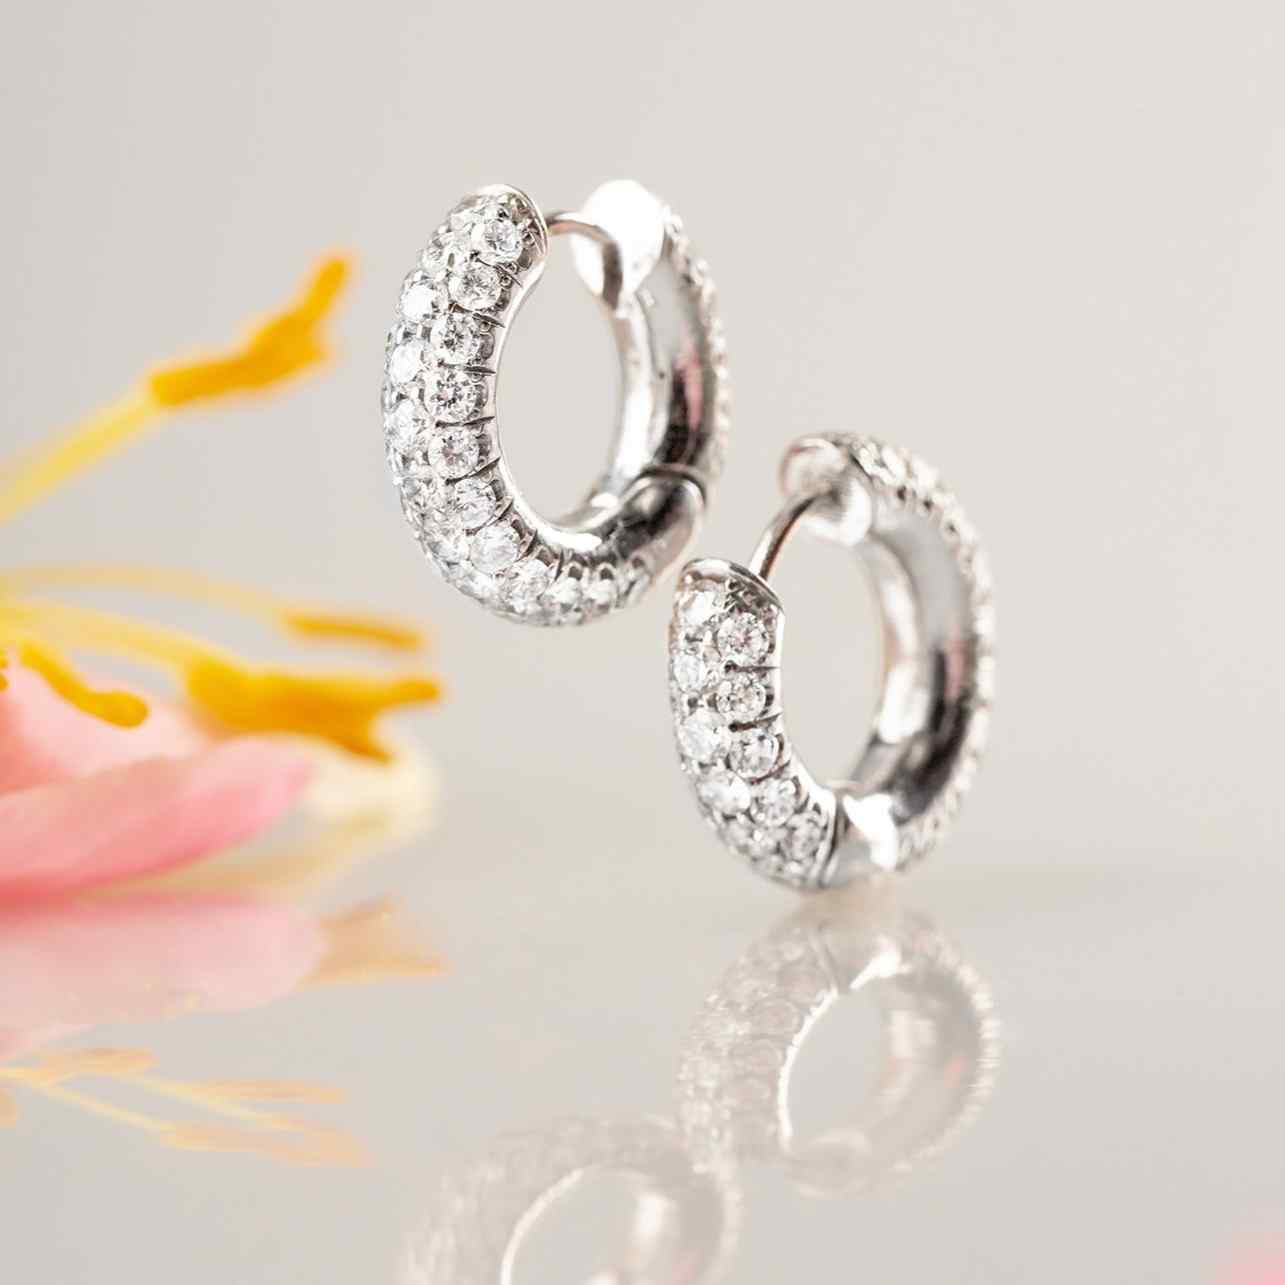 The Dalliance Pavé Hoops feature 100 brilliant diamonds that cover the front and back of these wide pavé hoops. Featuring 8 grams of 18k gold and nearly 2ct of diamonds. Earrings sold as a pair.